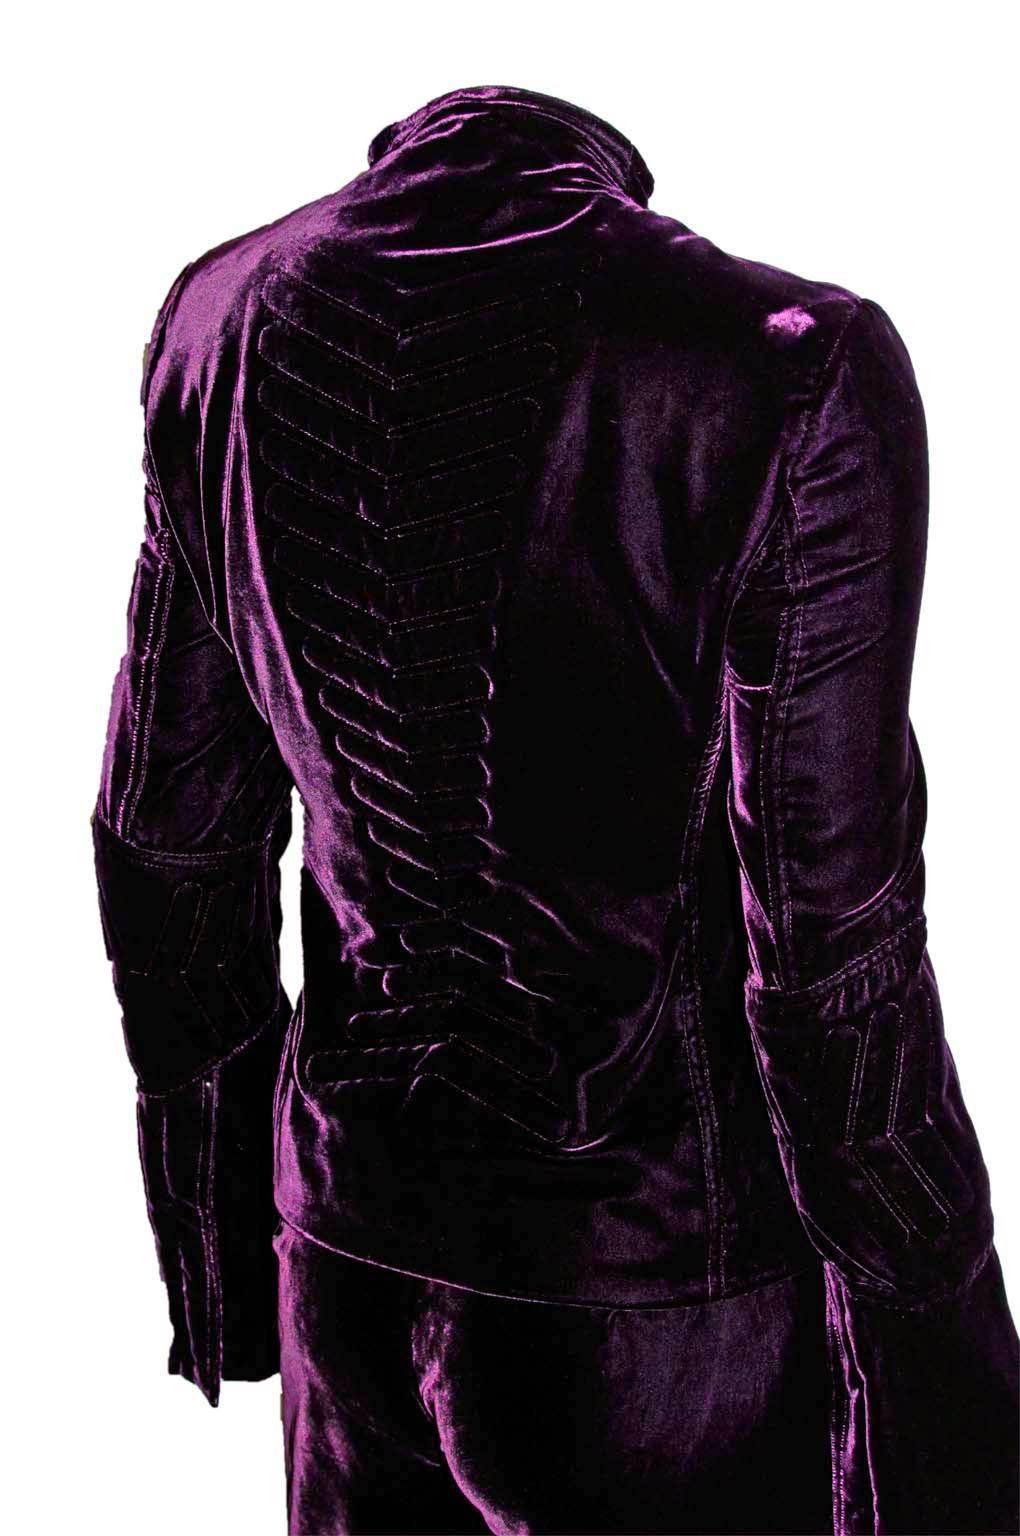 Heavenly Aubergine Velvet Tom Ford For Gucci Fall Winter 2004 Jacket & Pants Suit In Italian Size 42!

Who could ever forget Tom Ford's incredible swansong for Gucci, way back in 2004? This simply heavenly suit, one of the absolute stars of that